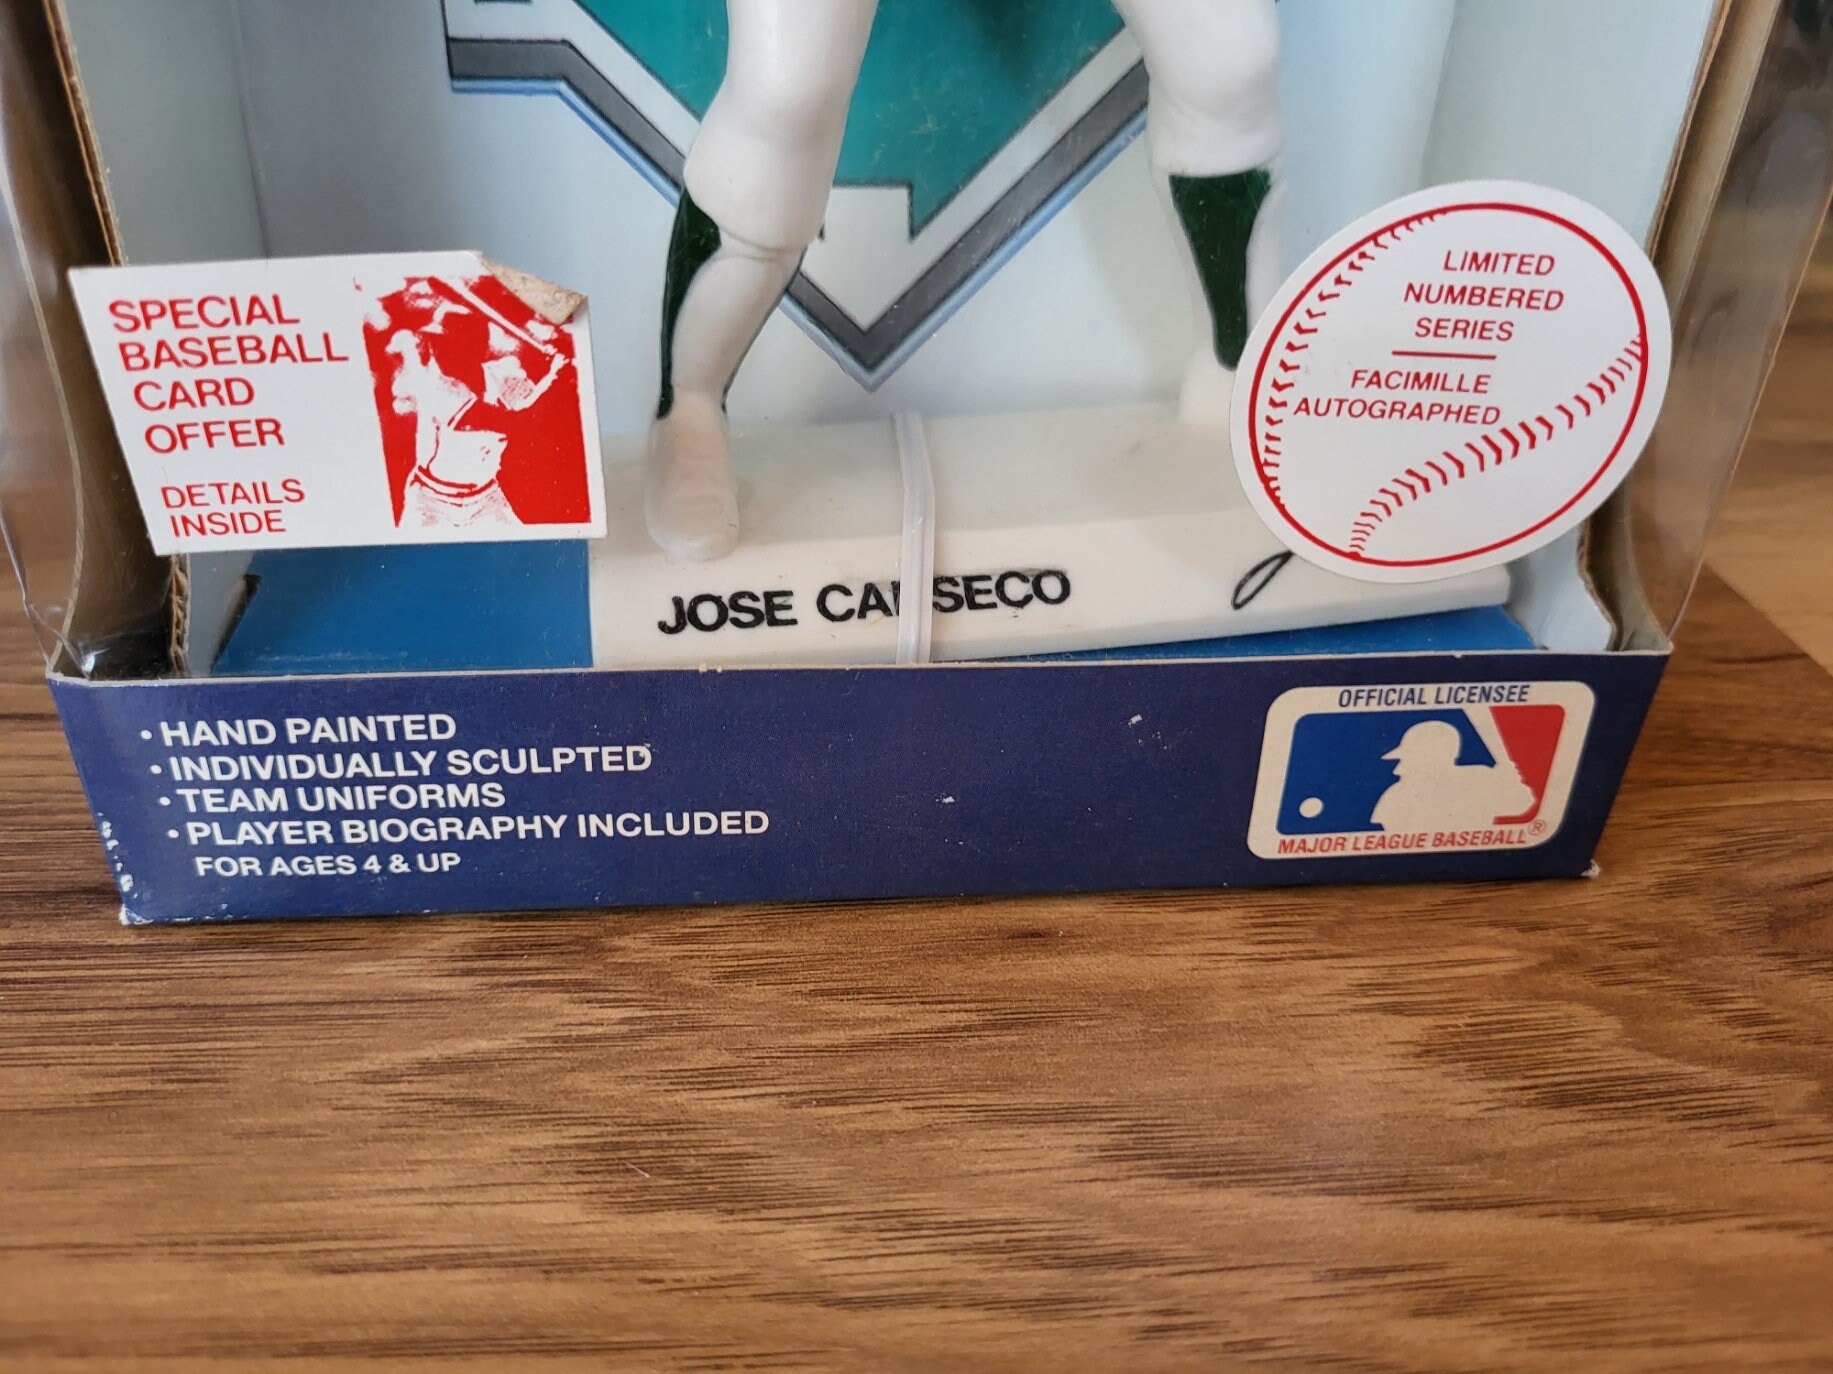 Jose Canseco 33 1988 Baseball Superstar Statues Oakland Athletics for sale online 